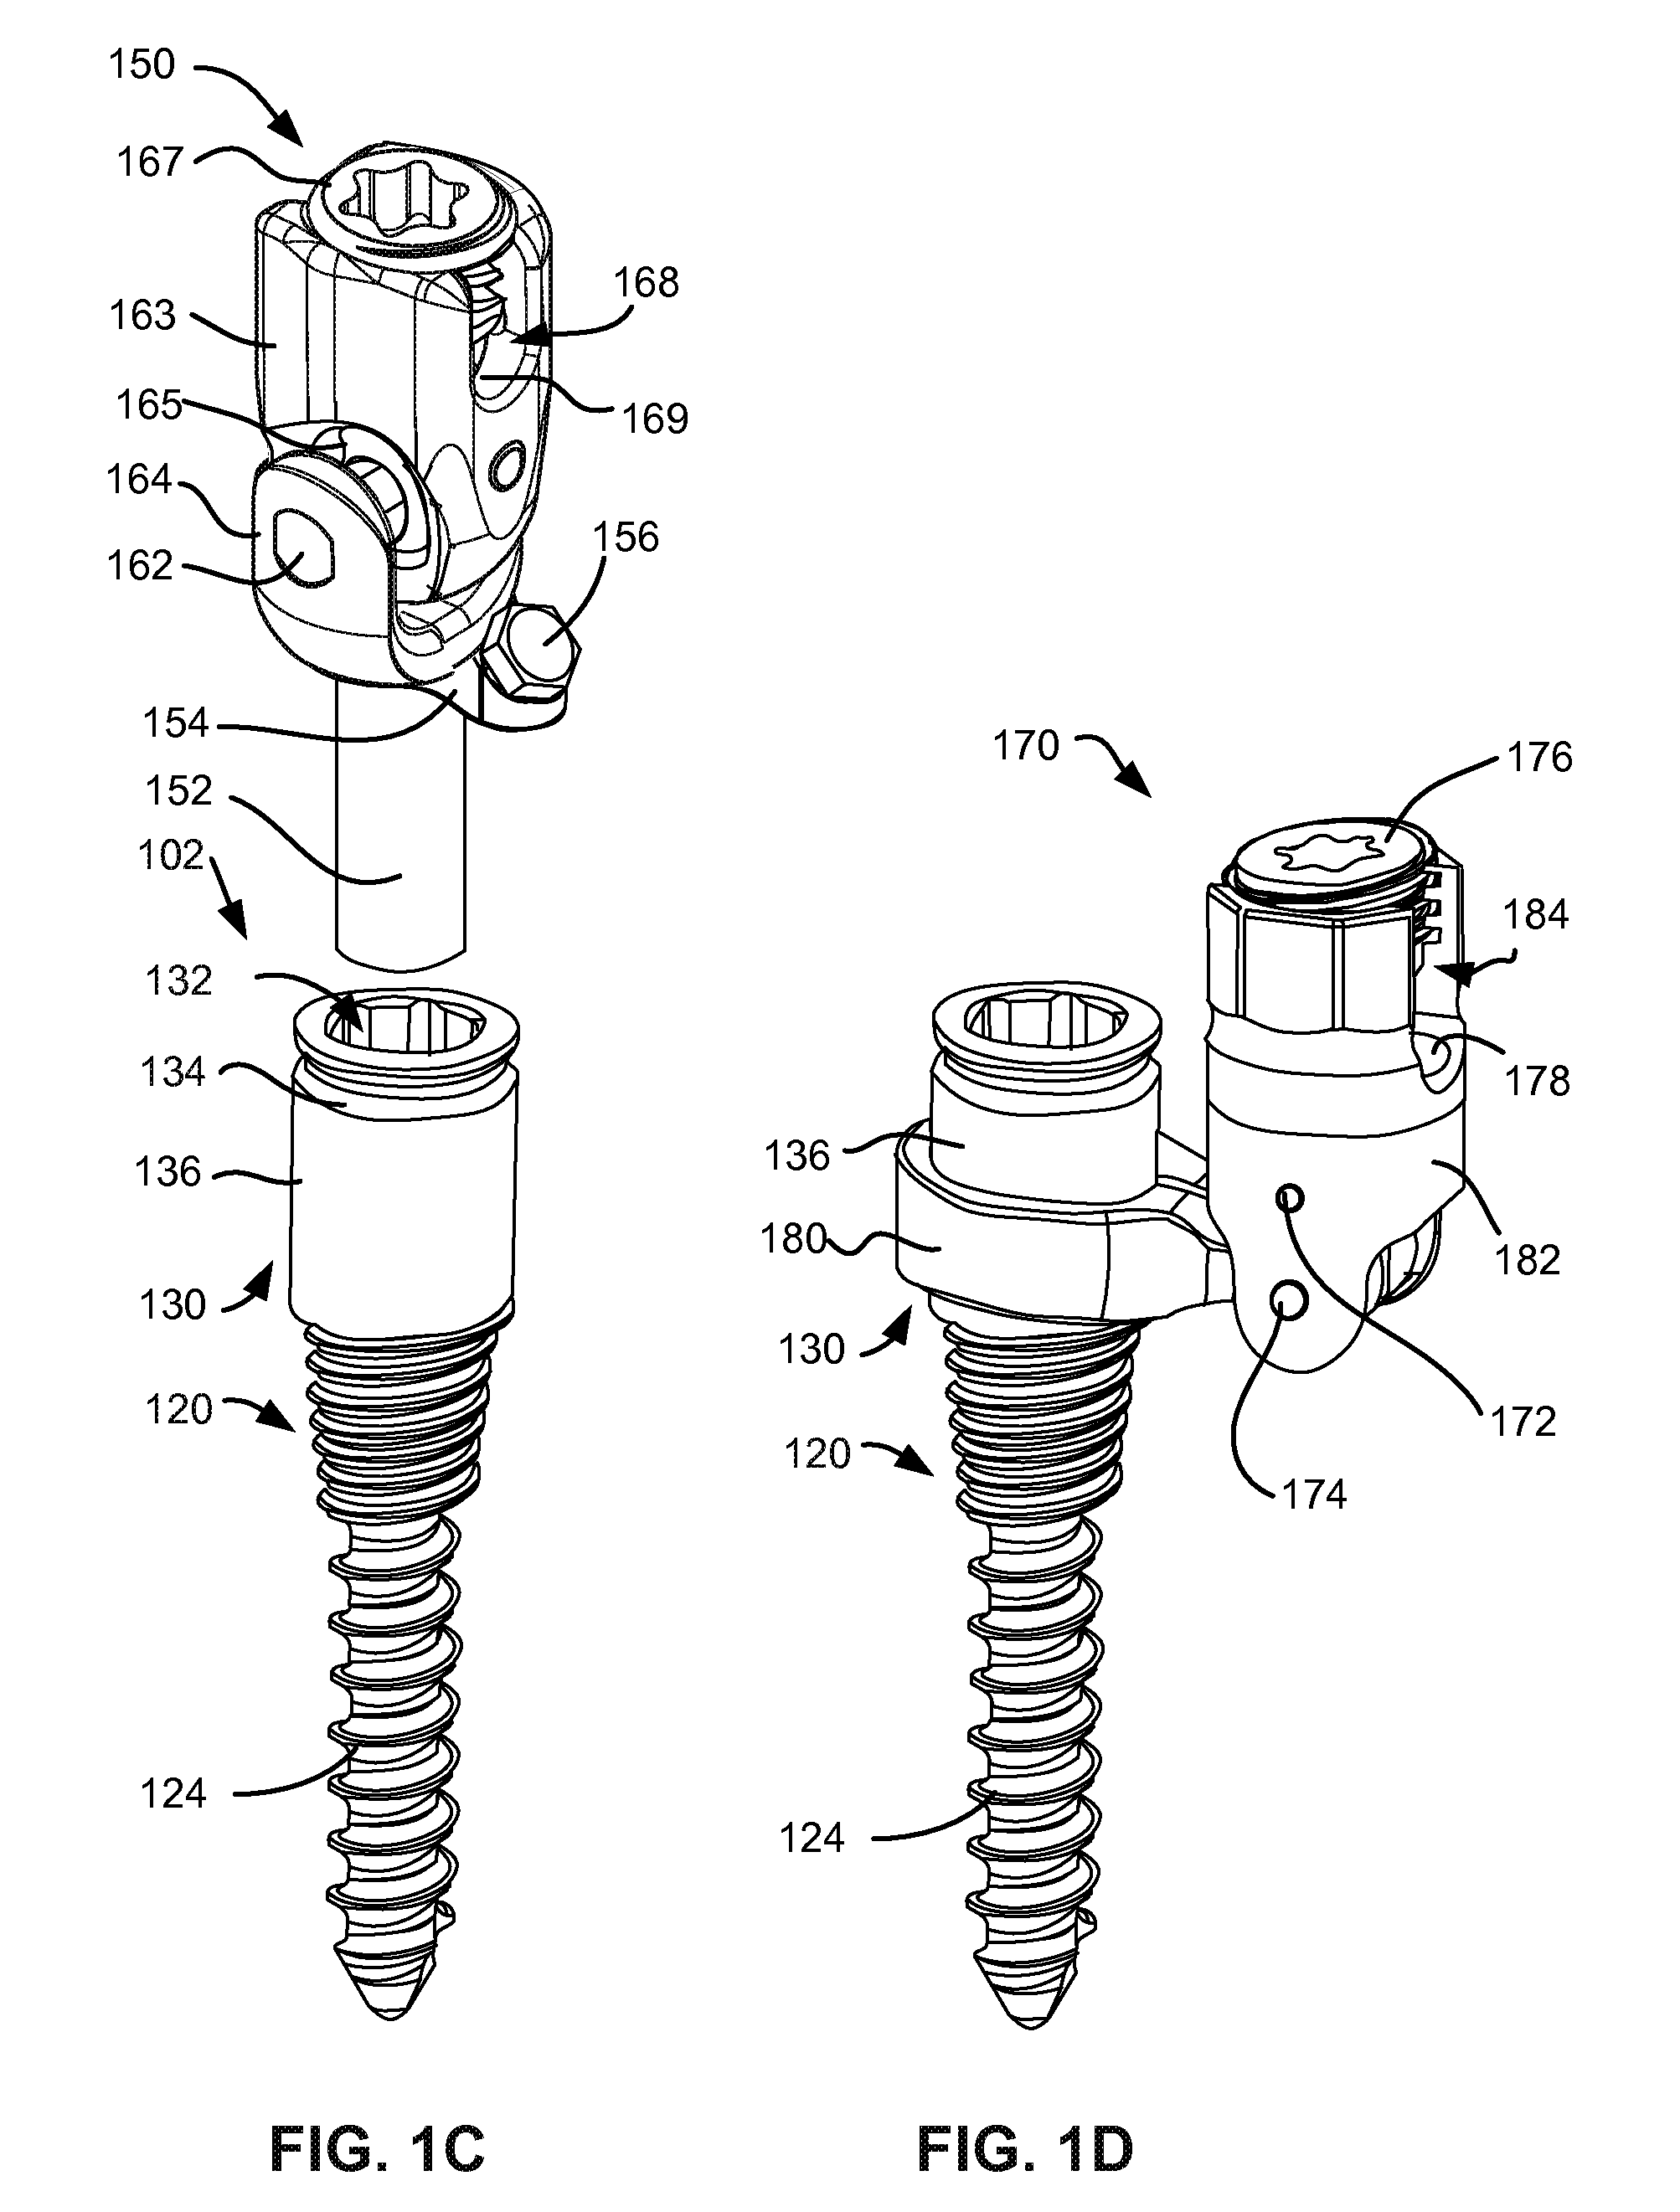 Low profile spinal prosthesis incorporating a cannulated bone anchor having a deflectable post and a compound spinal rod